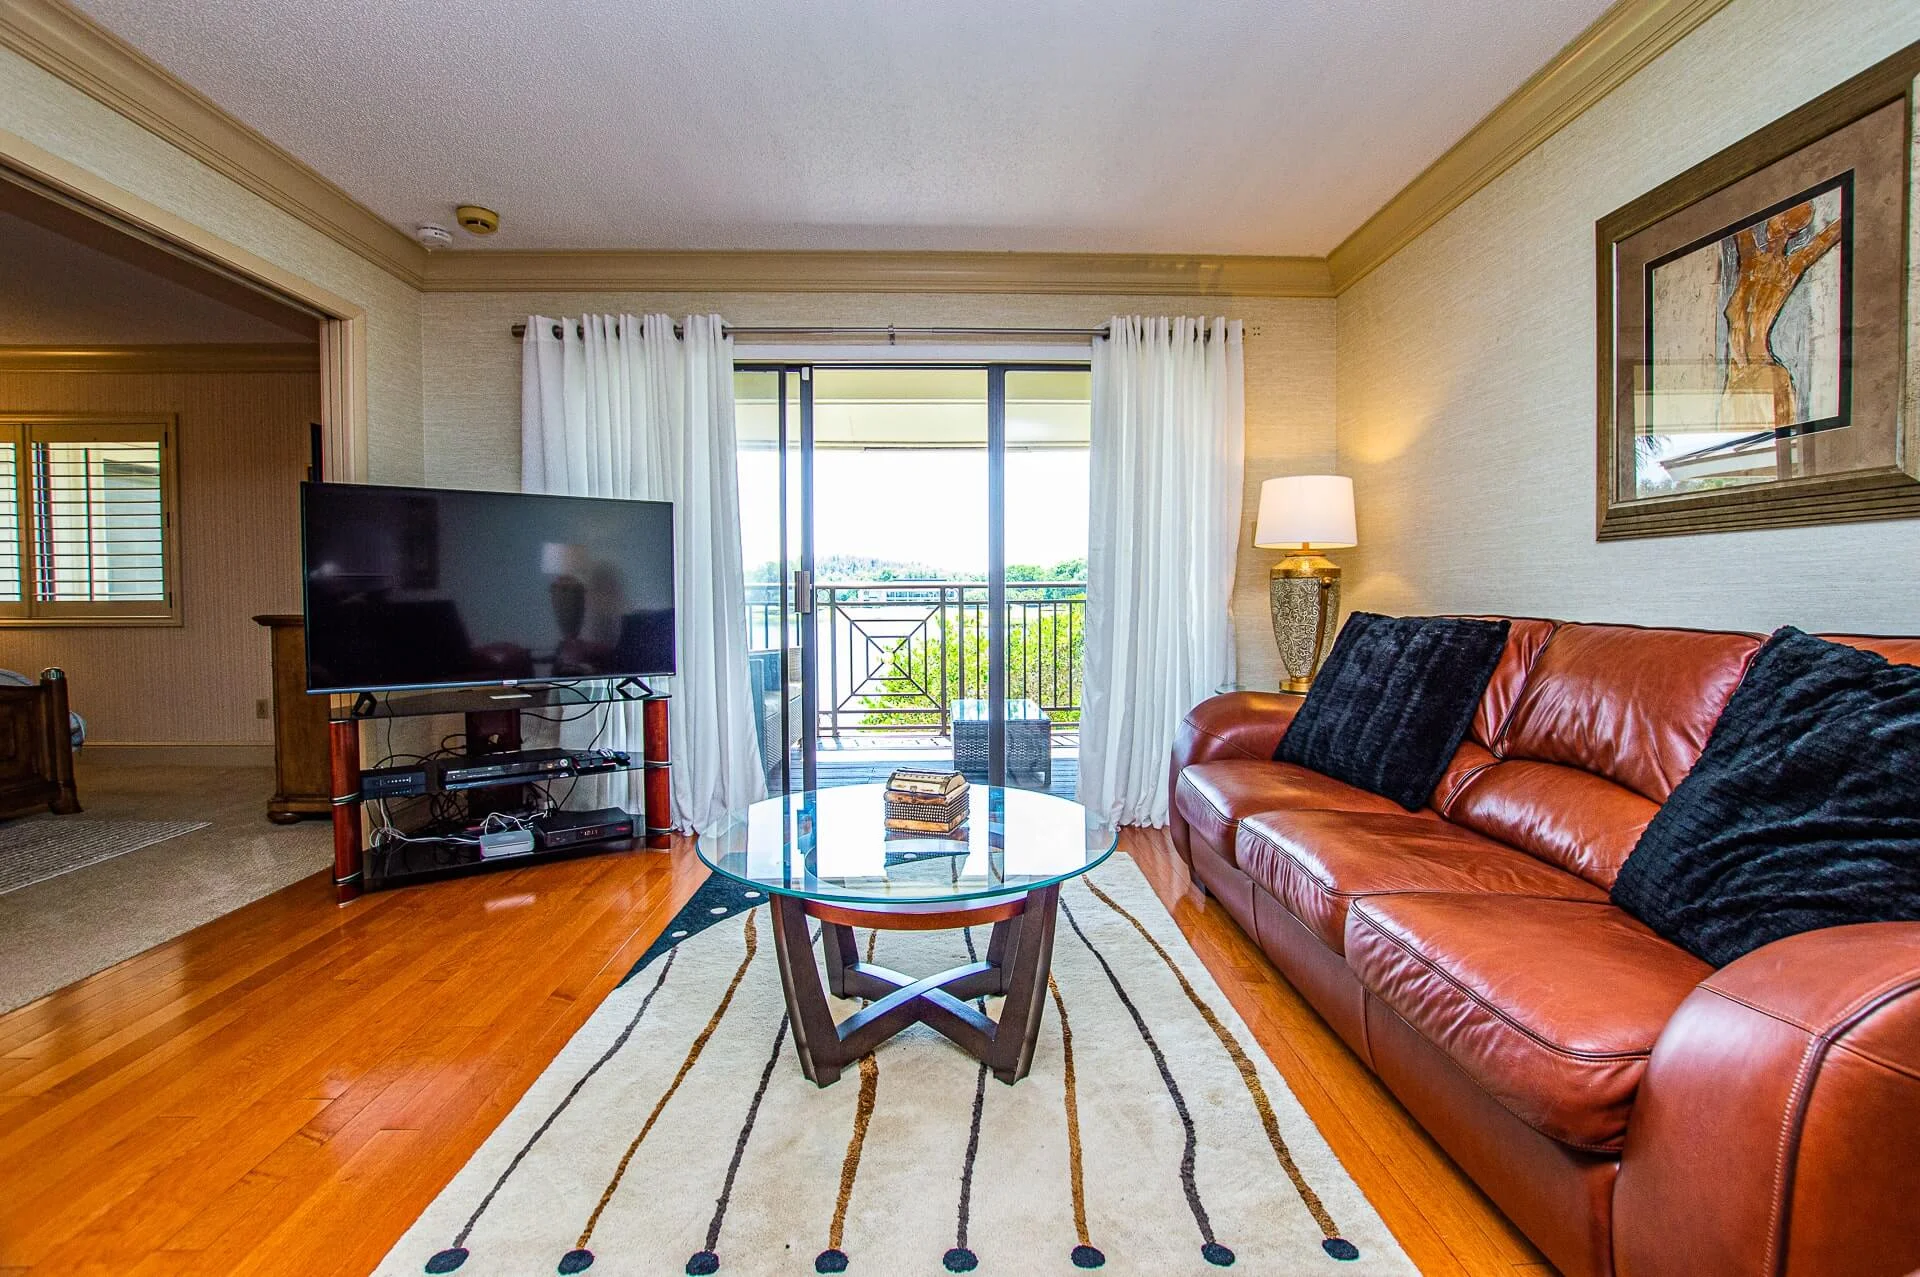 A living room of a luxury condo managed by Property Managers in Clearwater FL